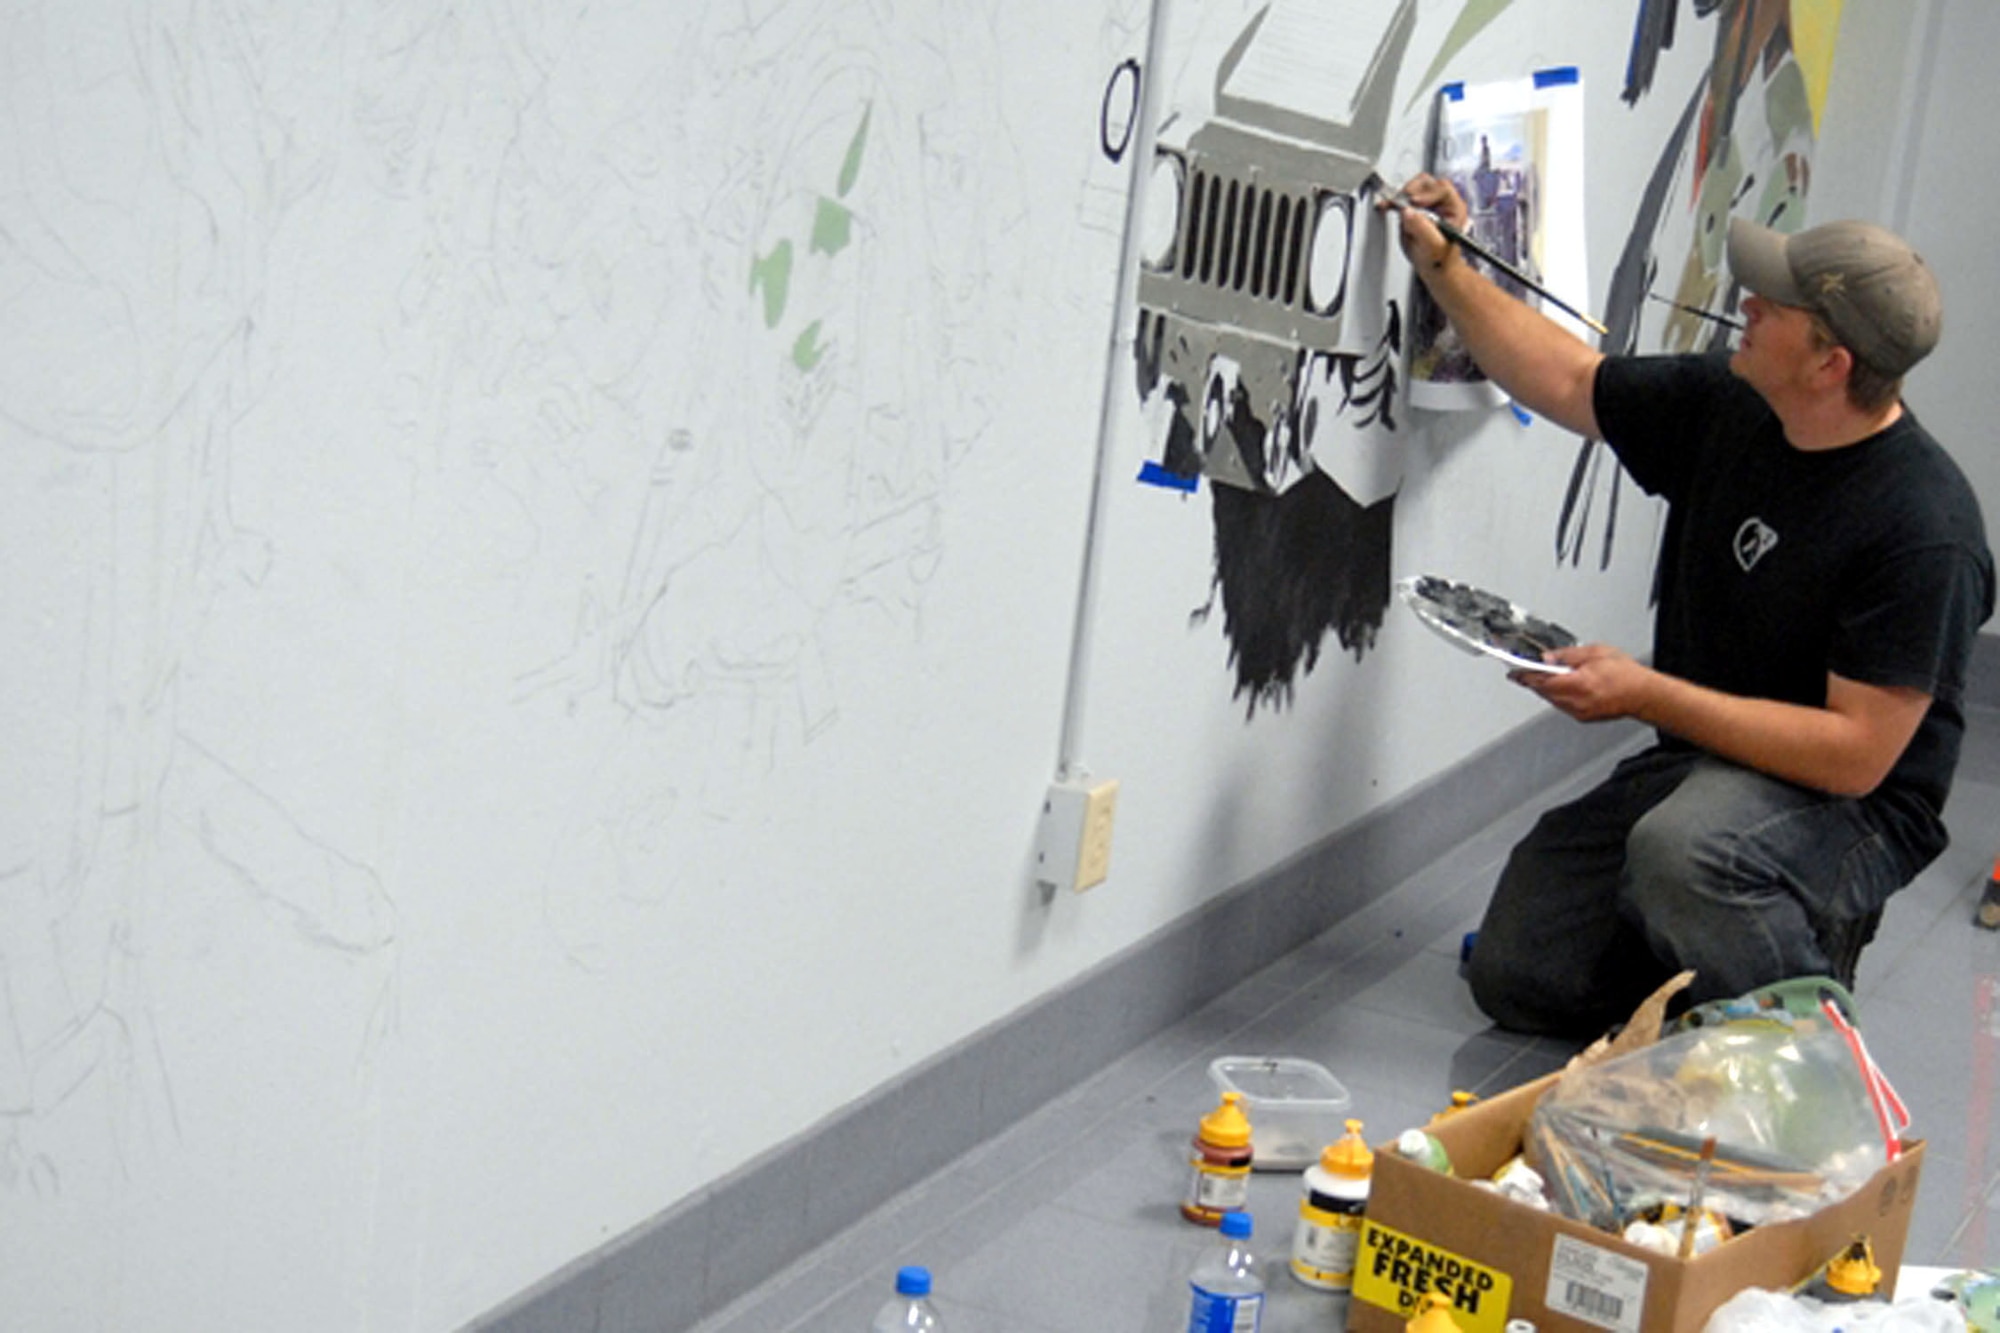 Bobby Stillwell paints a HUMVEE on the wall of the 341st Security Forces Group headquarters during one of his visits to Malmstrom from Wenatchee, Wash. He is the son of Bob Stillwell, 341st Communications Squadron contracted graphic artist, who volunteered more than 230 hours painting a security forces-themed mural. The Stillwell's began painting the mural in August 2007 and plan to continue producing more murals throughout 2008. (U.S. Air Force photo) 